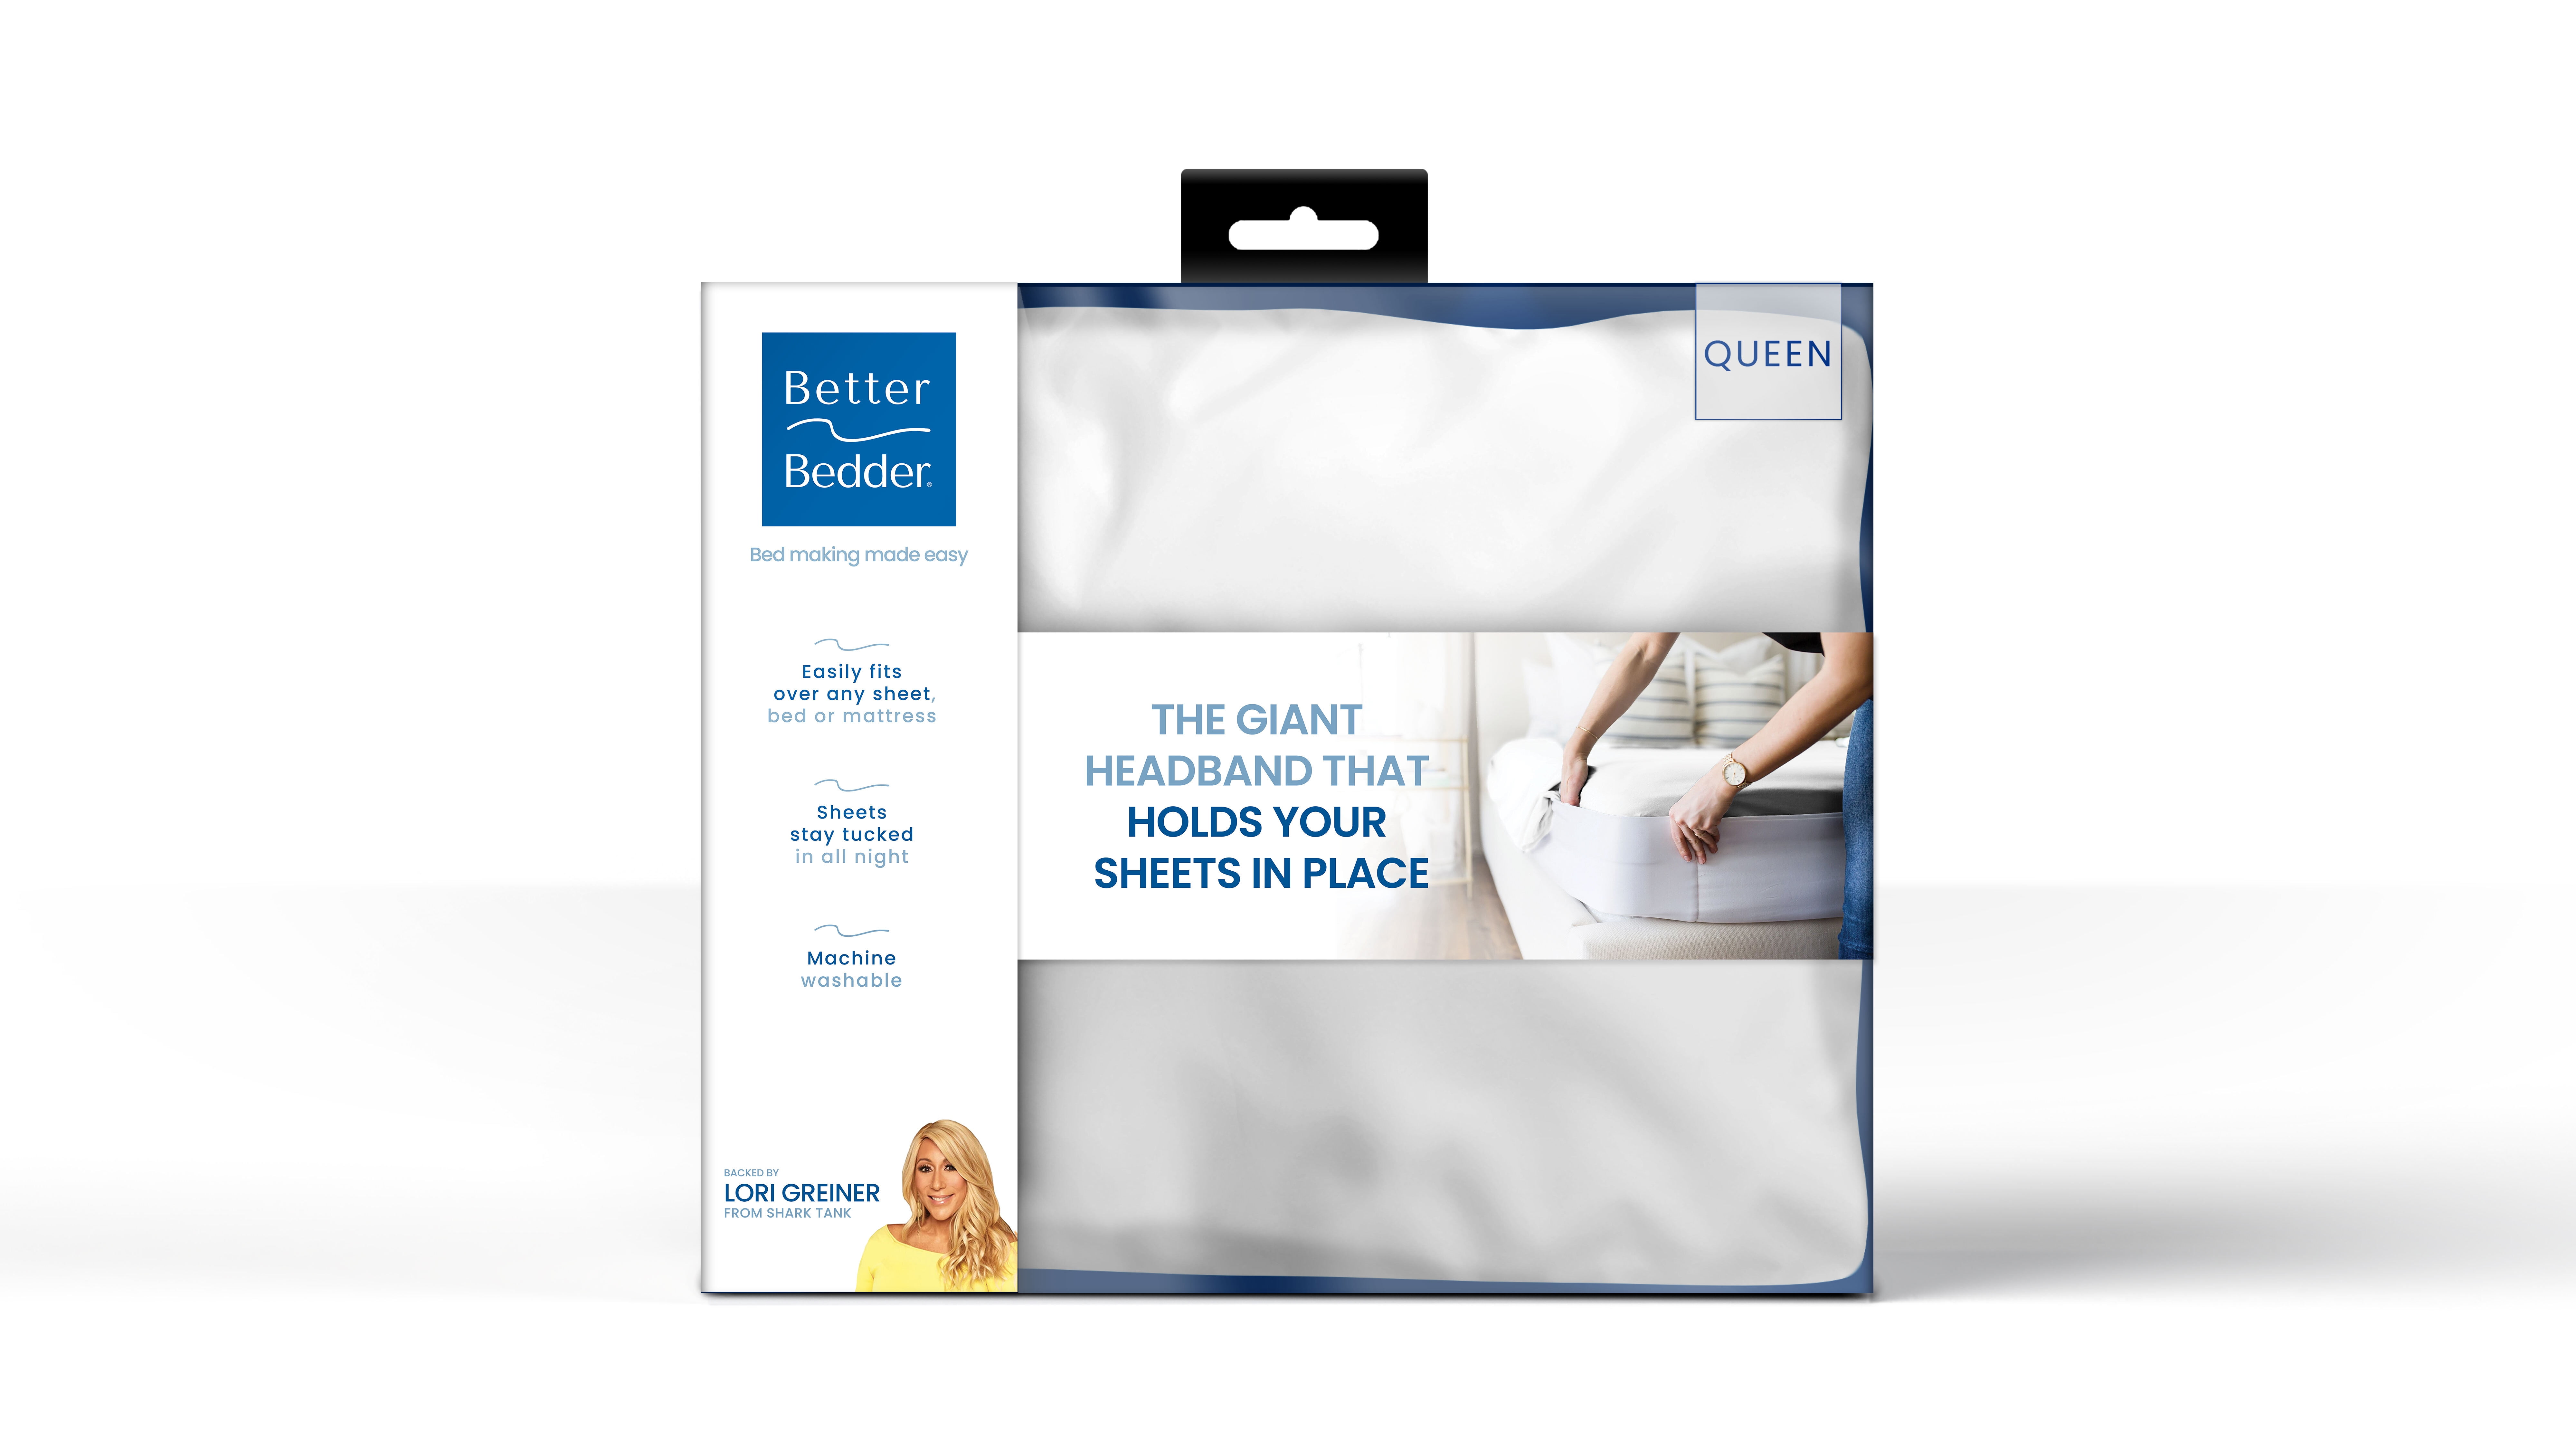 Better Bedder Bed Headband, Fabric Shell of Cotton, Polyester, and Spandex,  Bed Making Made Easy, Transforms Any Flat Sheet into A Fitted Sheet, Fits